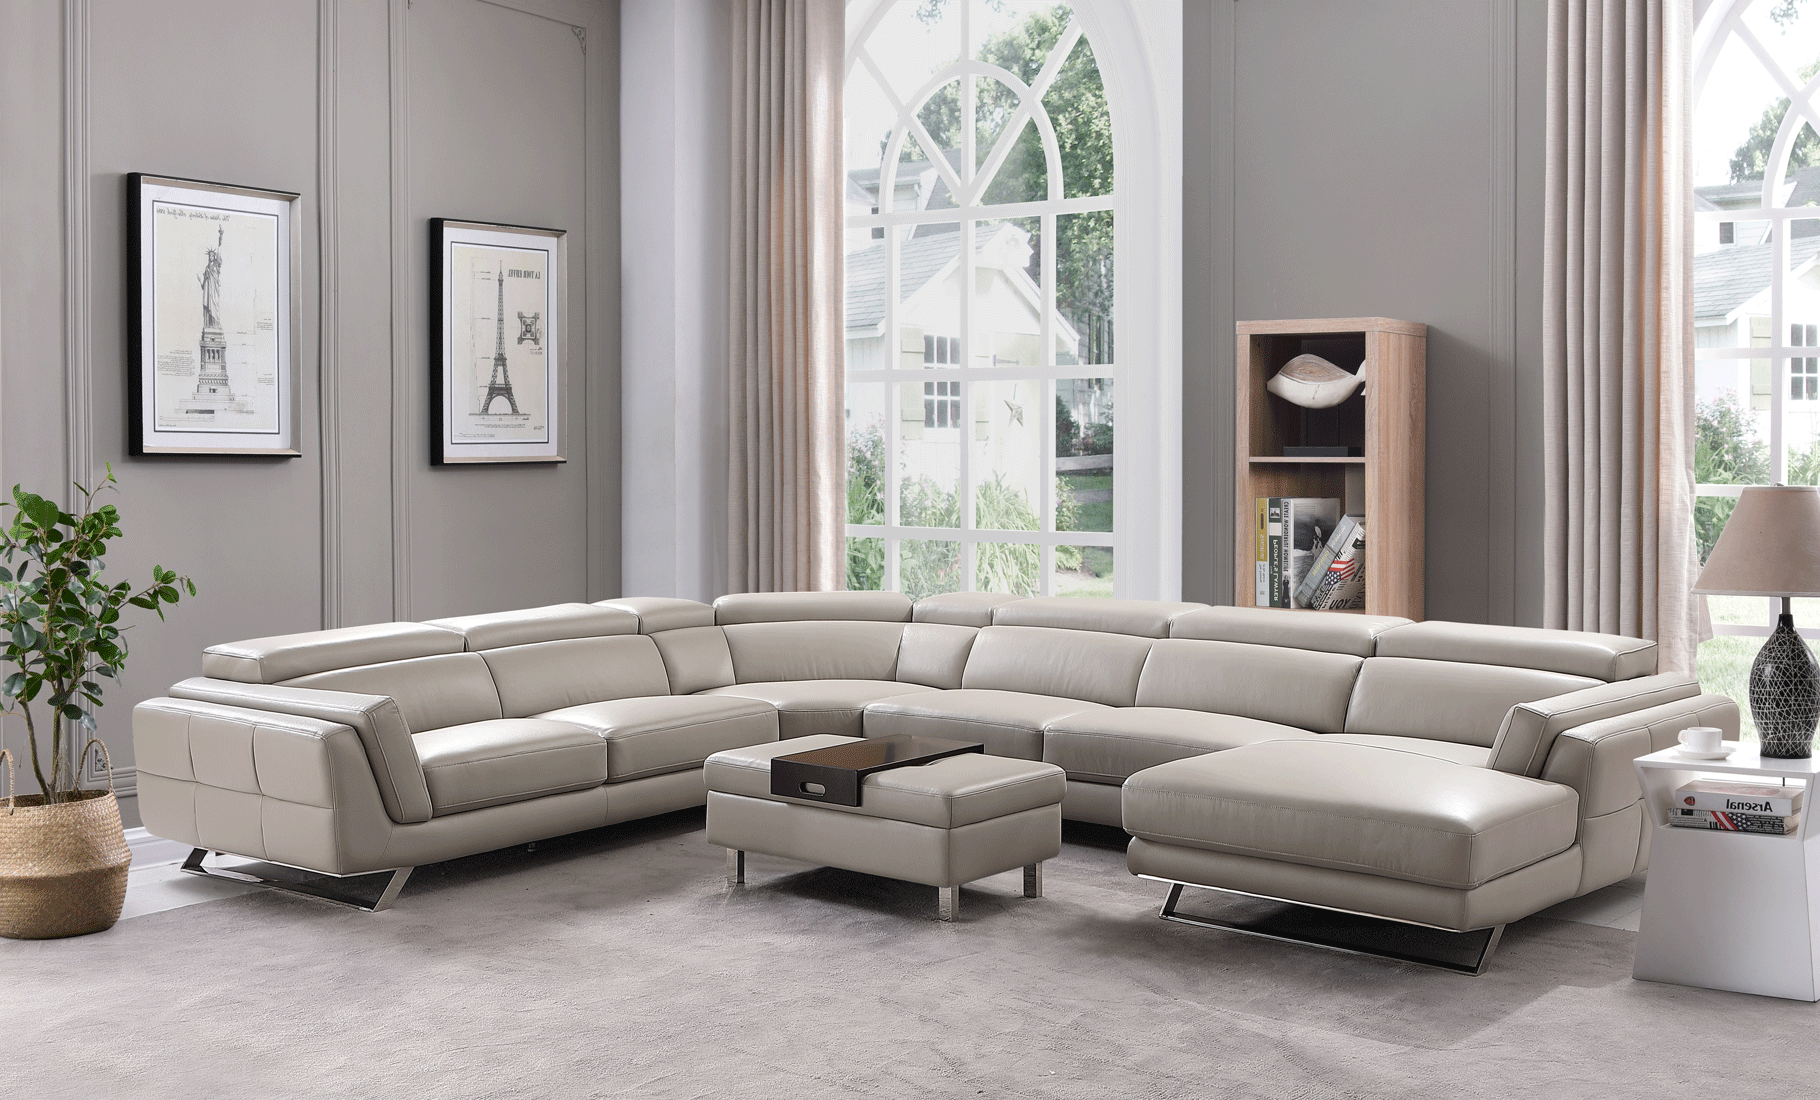 Living Room Furniture Sleepers Sofas Loveseats and Chairs 582 Sectional Right